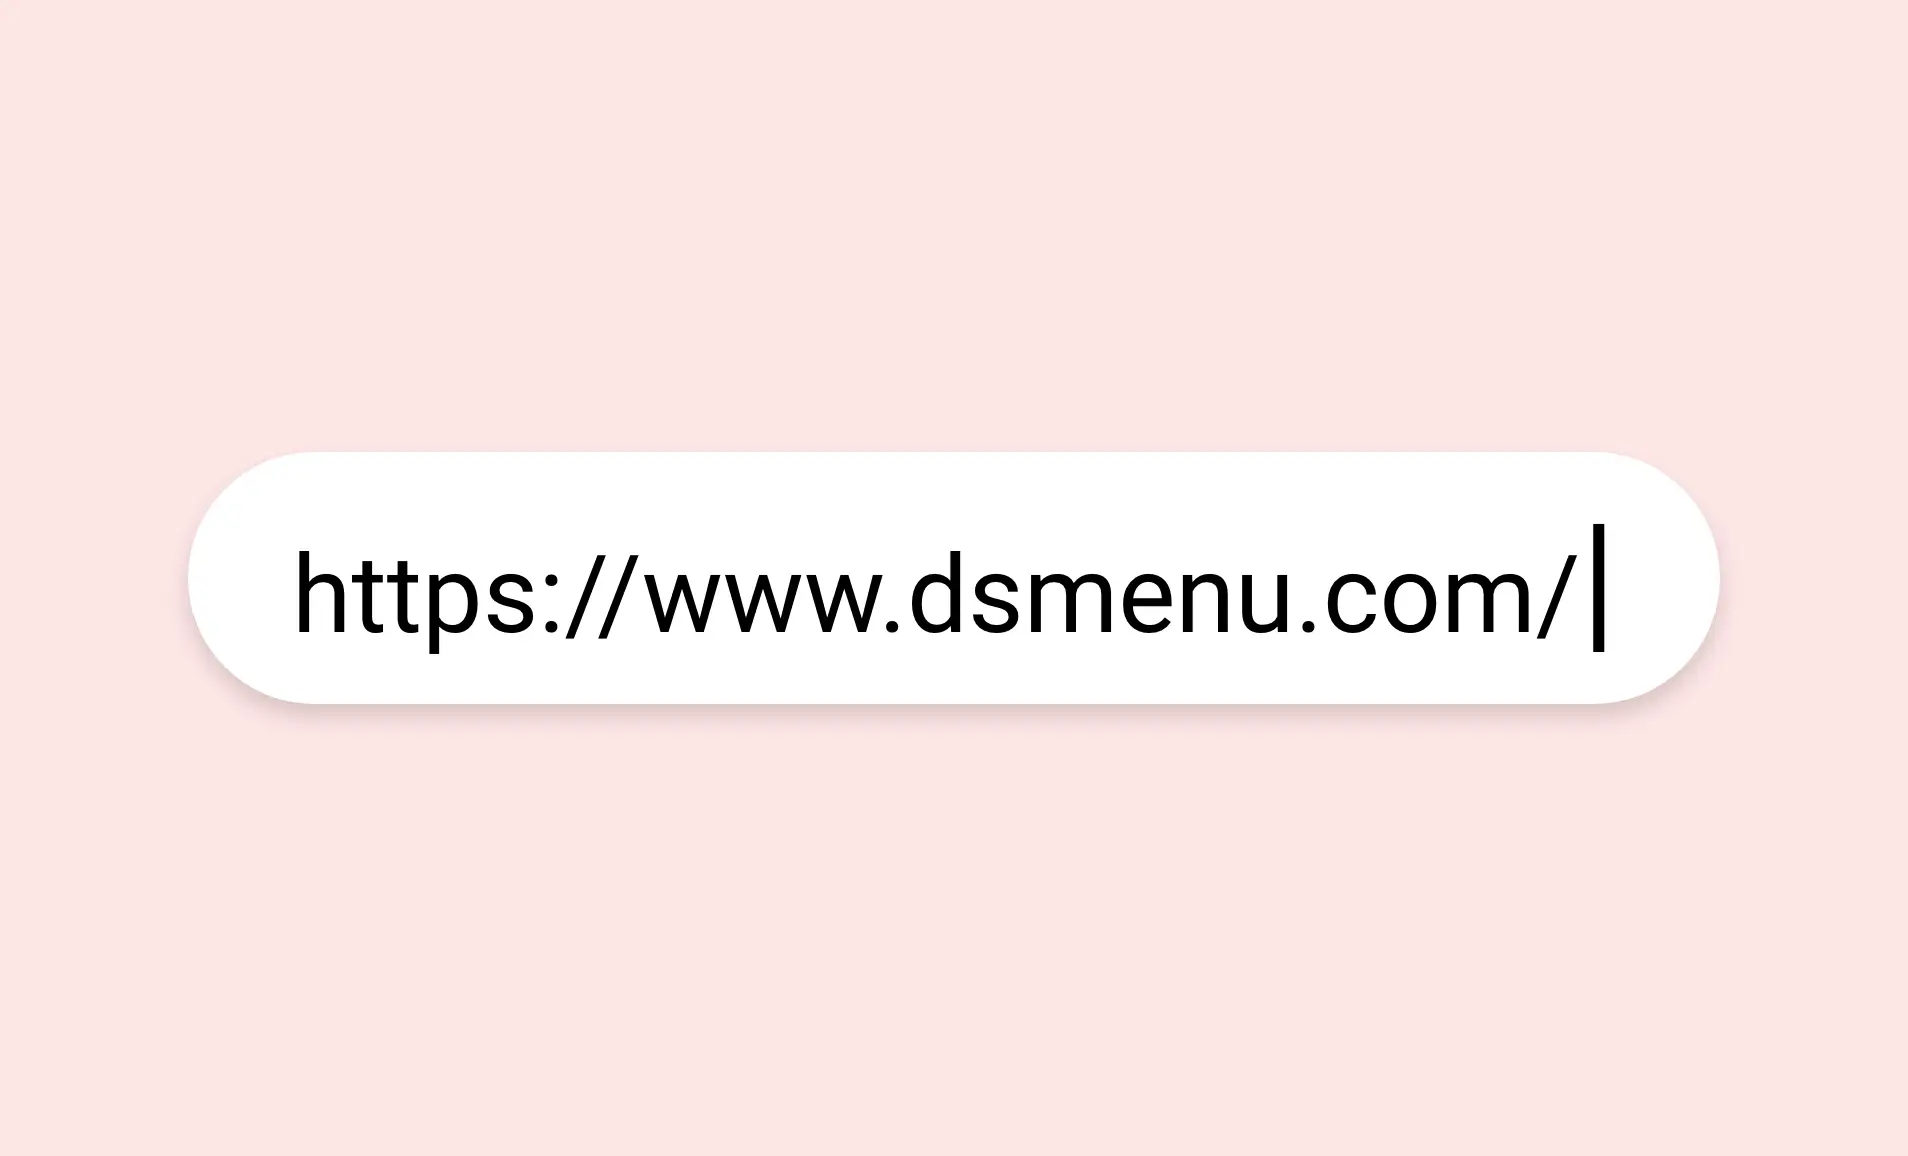 Pickcel software interface with option to insert any URL from dsmenu account.